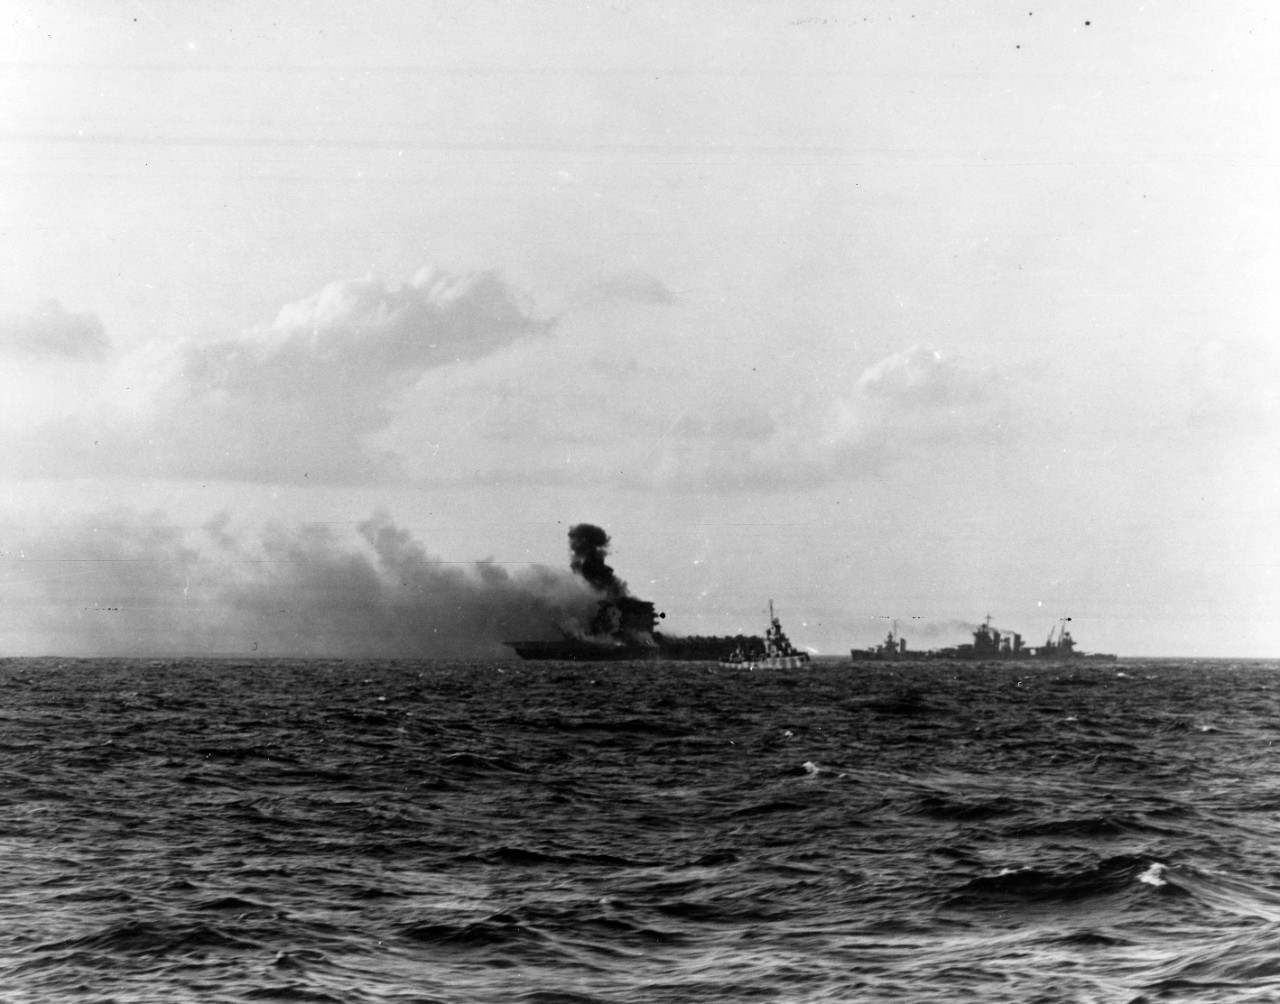 Photo #: 80-G-16668  Battle of the Coral Sea, May 1942